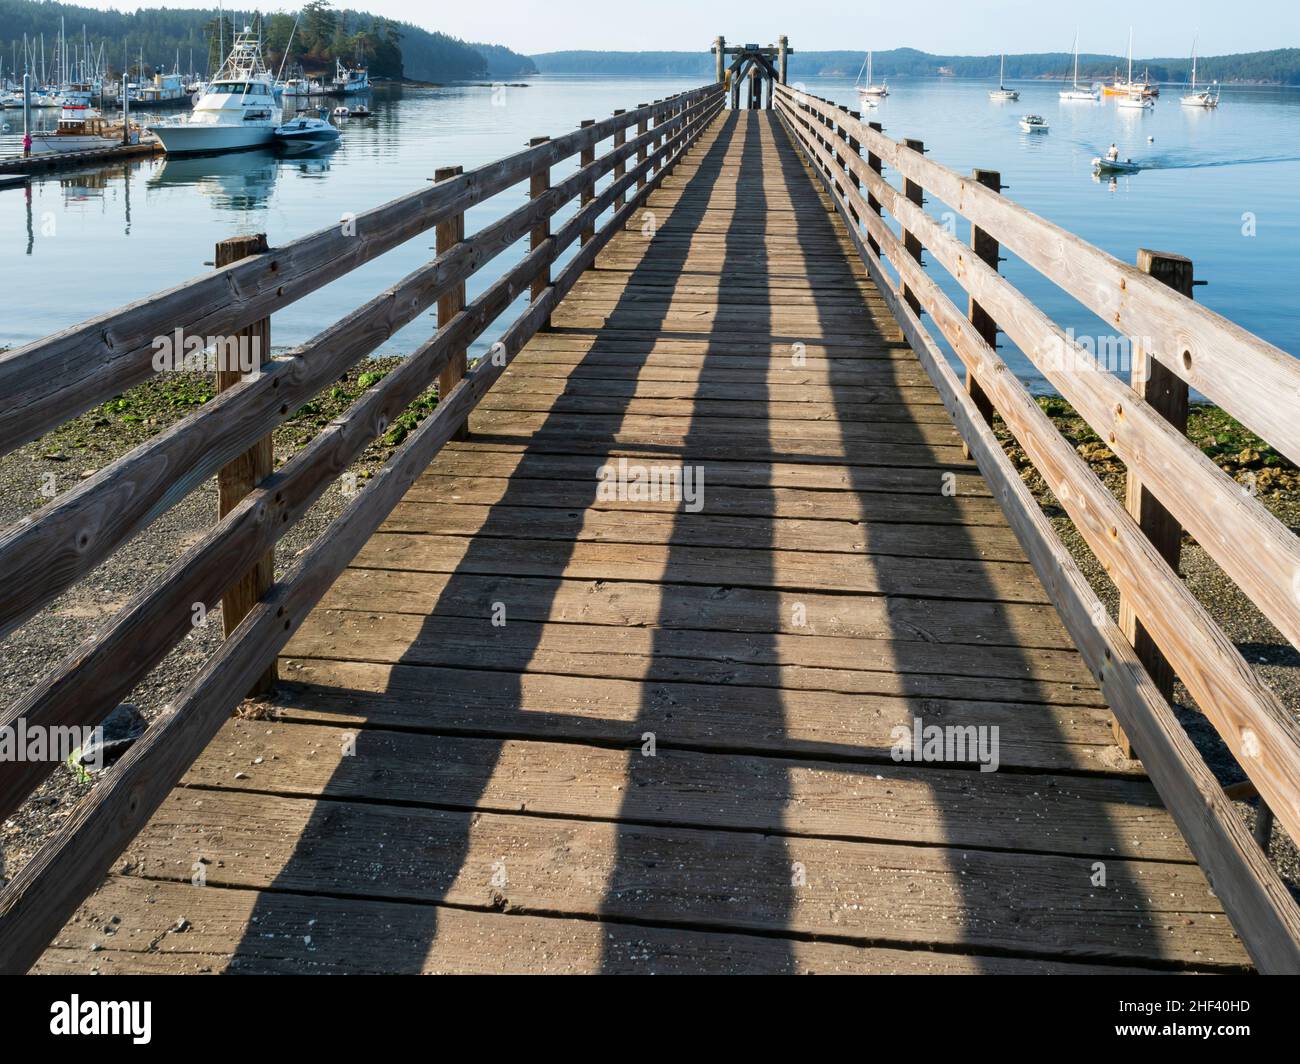 WA21068-00...WASHINGTON - Boat dock at West Sound on Orcas Island; part of the San Juan Islands group. Stock Photo